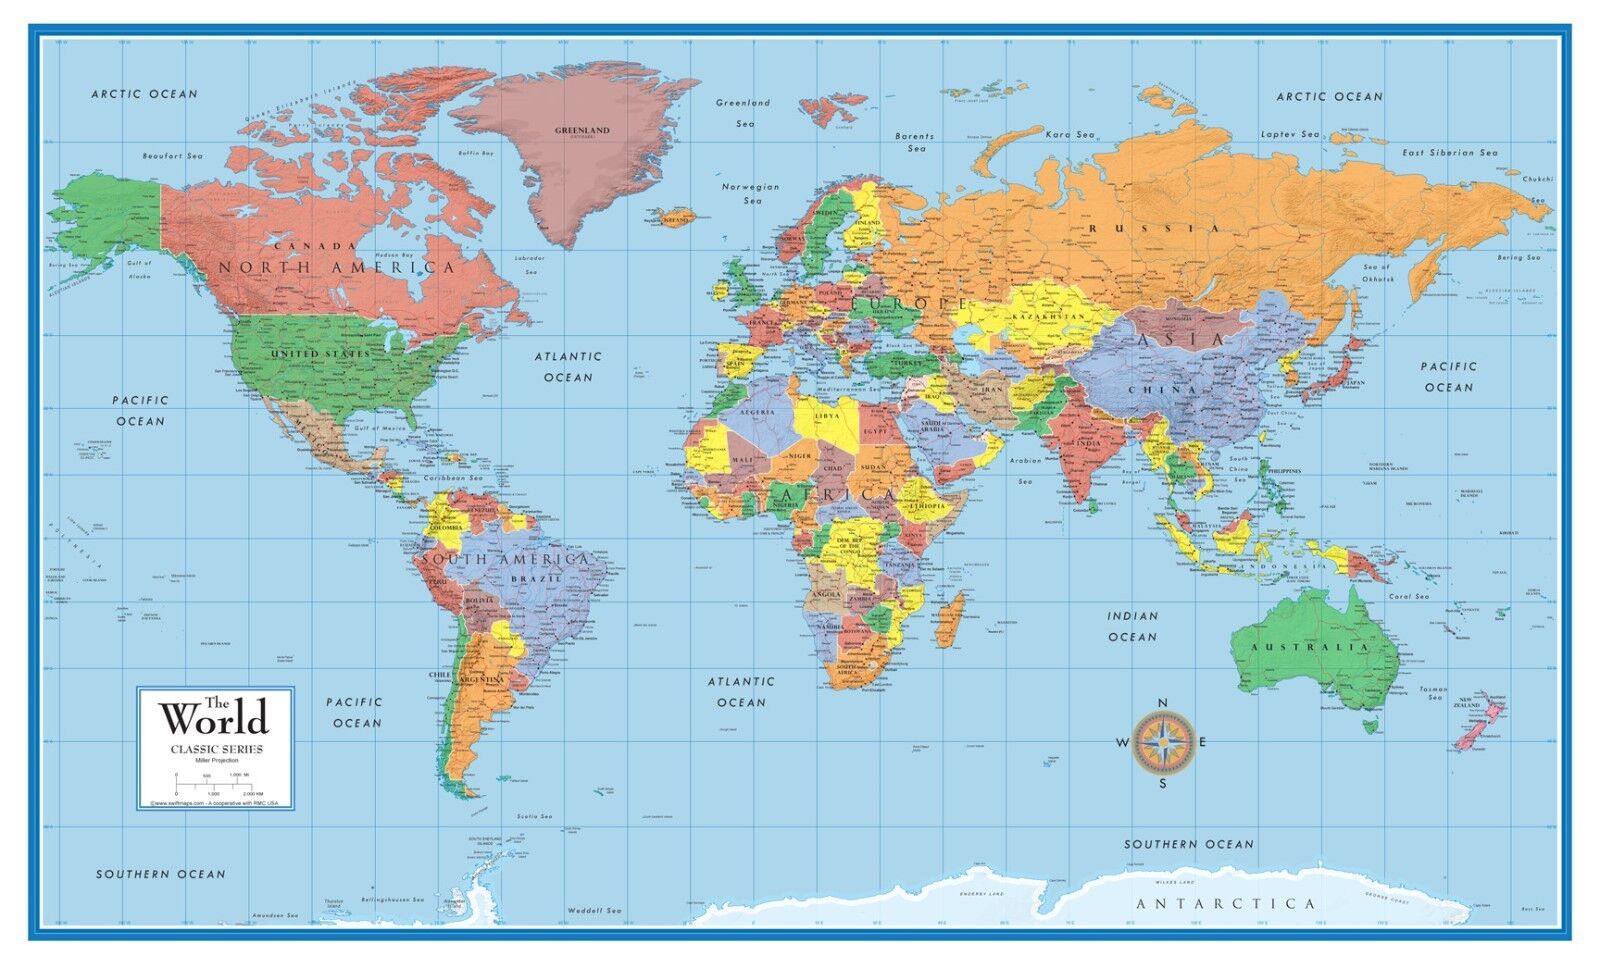 World Classic Elite Wall Map Mural Poster: Paper or Laminated